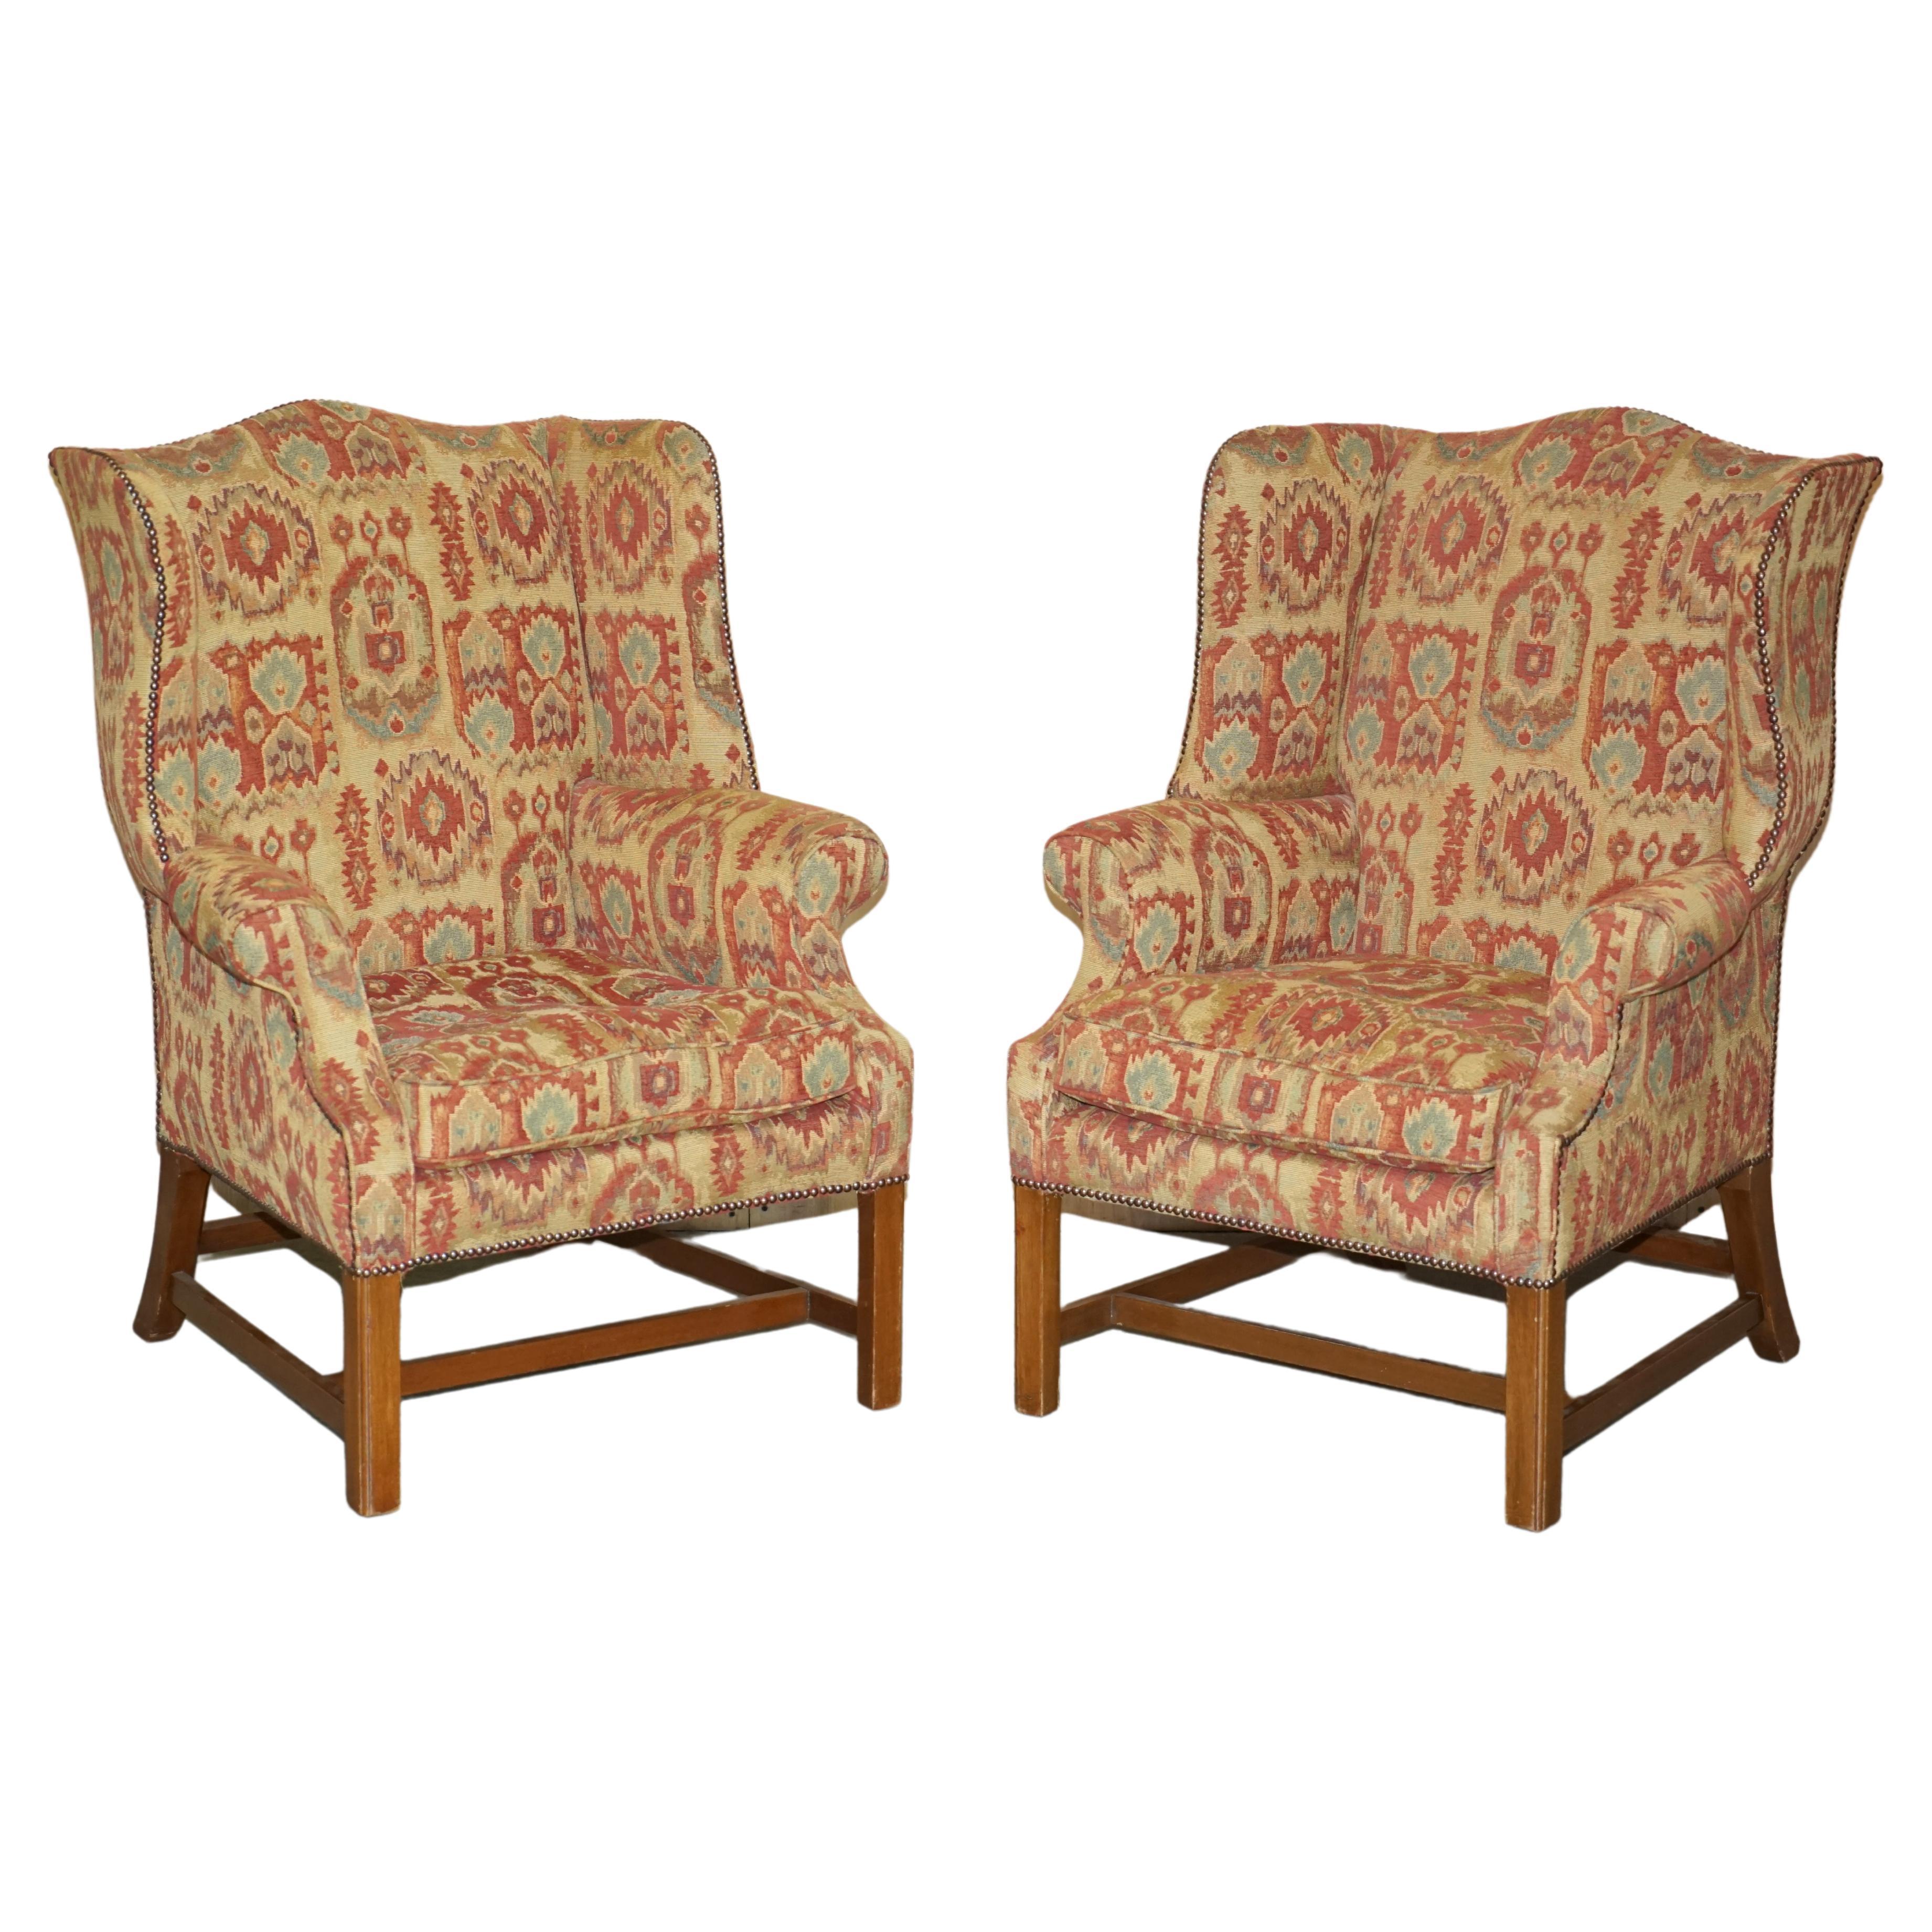 Pair of Lovely George III Style Wingback Armchairs with Kilim Pattern Uphosltery